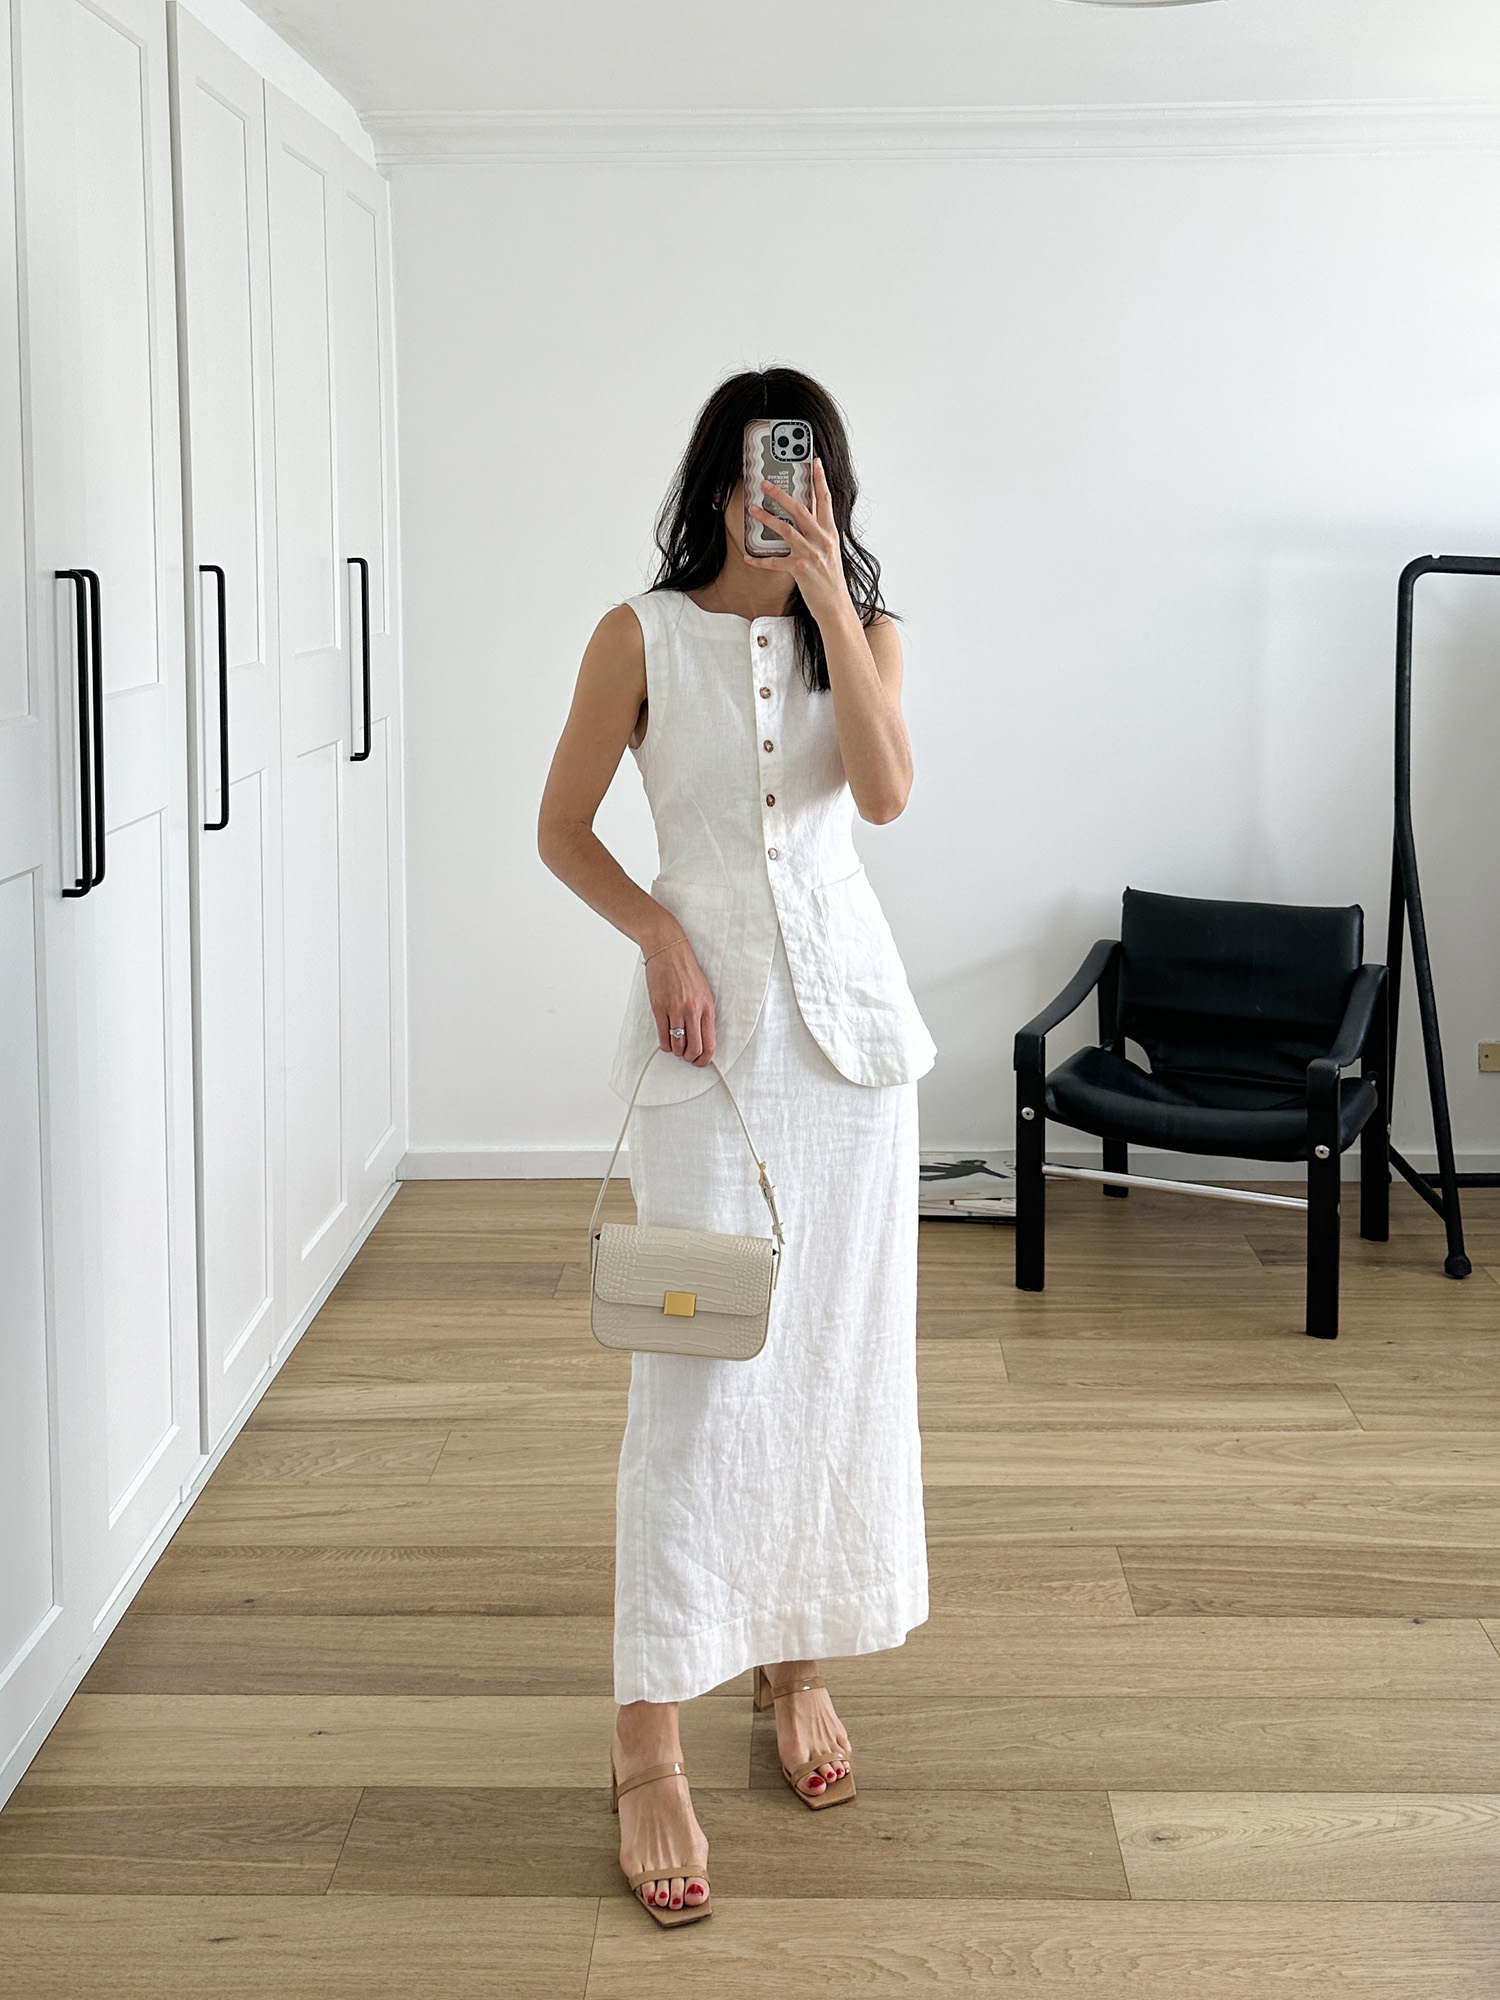 Wearing Posse Emma Vest and Emma Skirt with By Far Tanya Mules and The Curated Mini Shoulder Bag